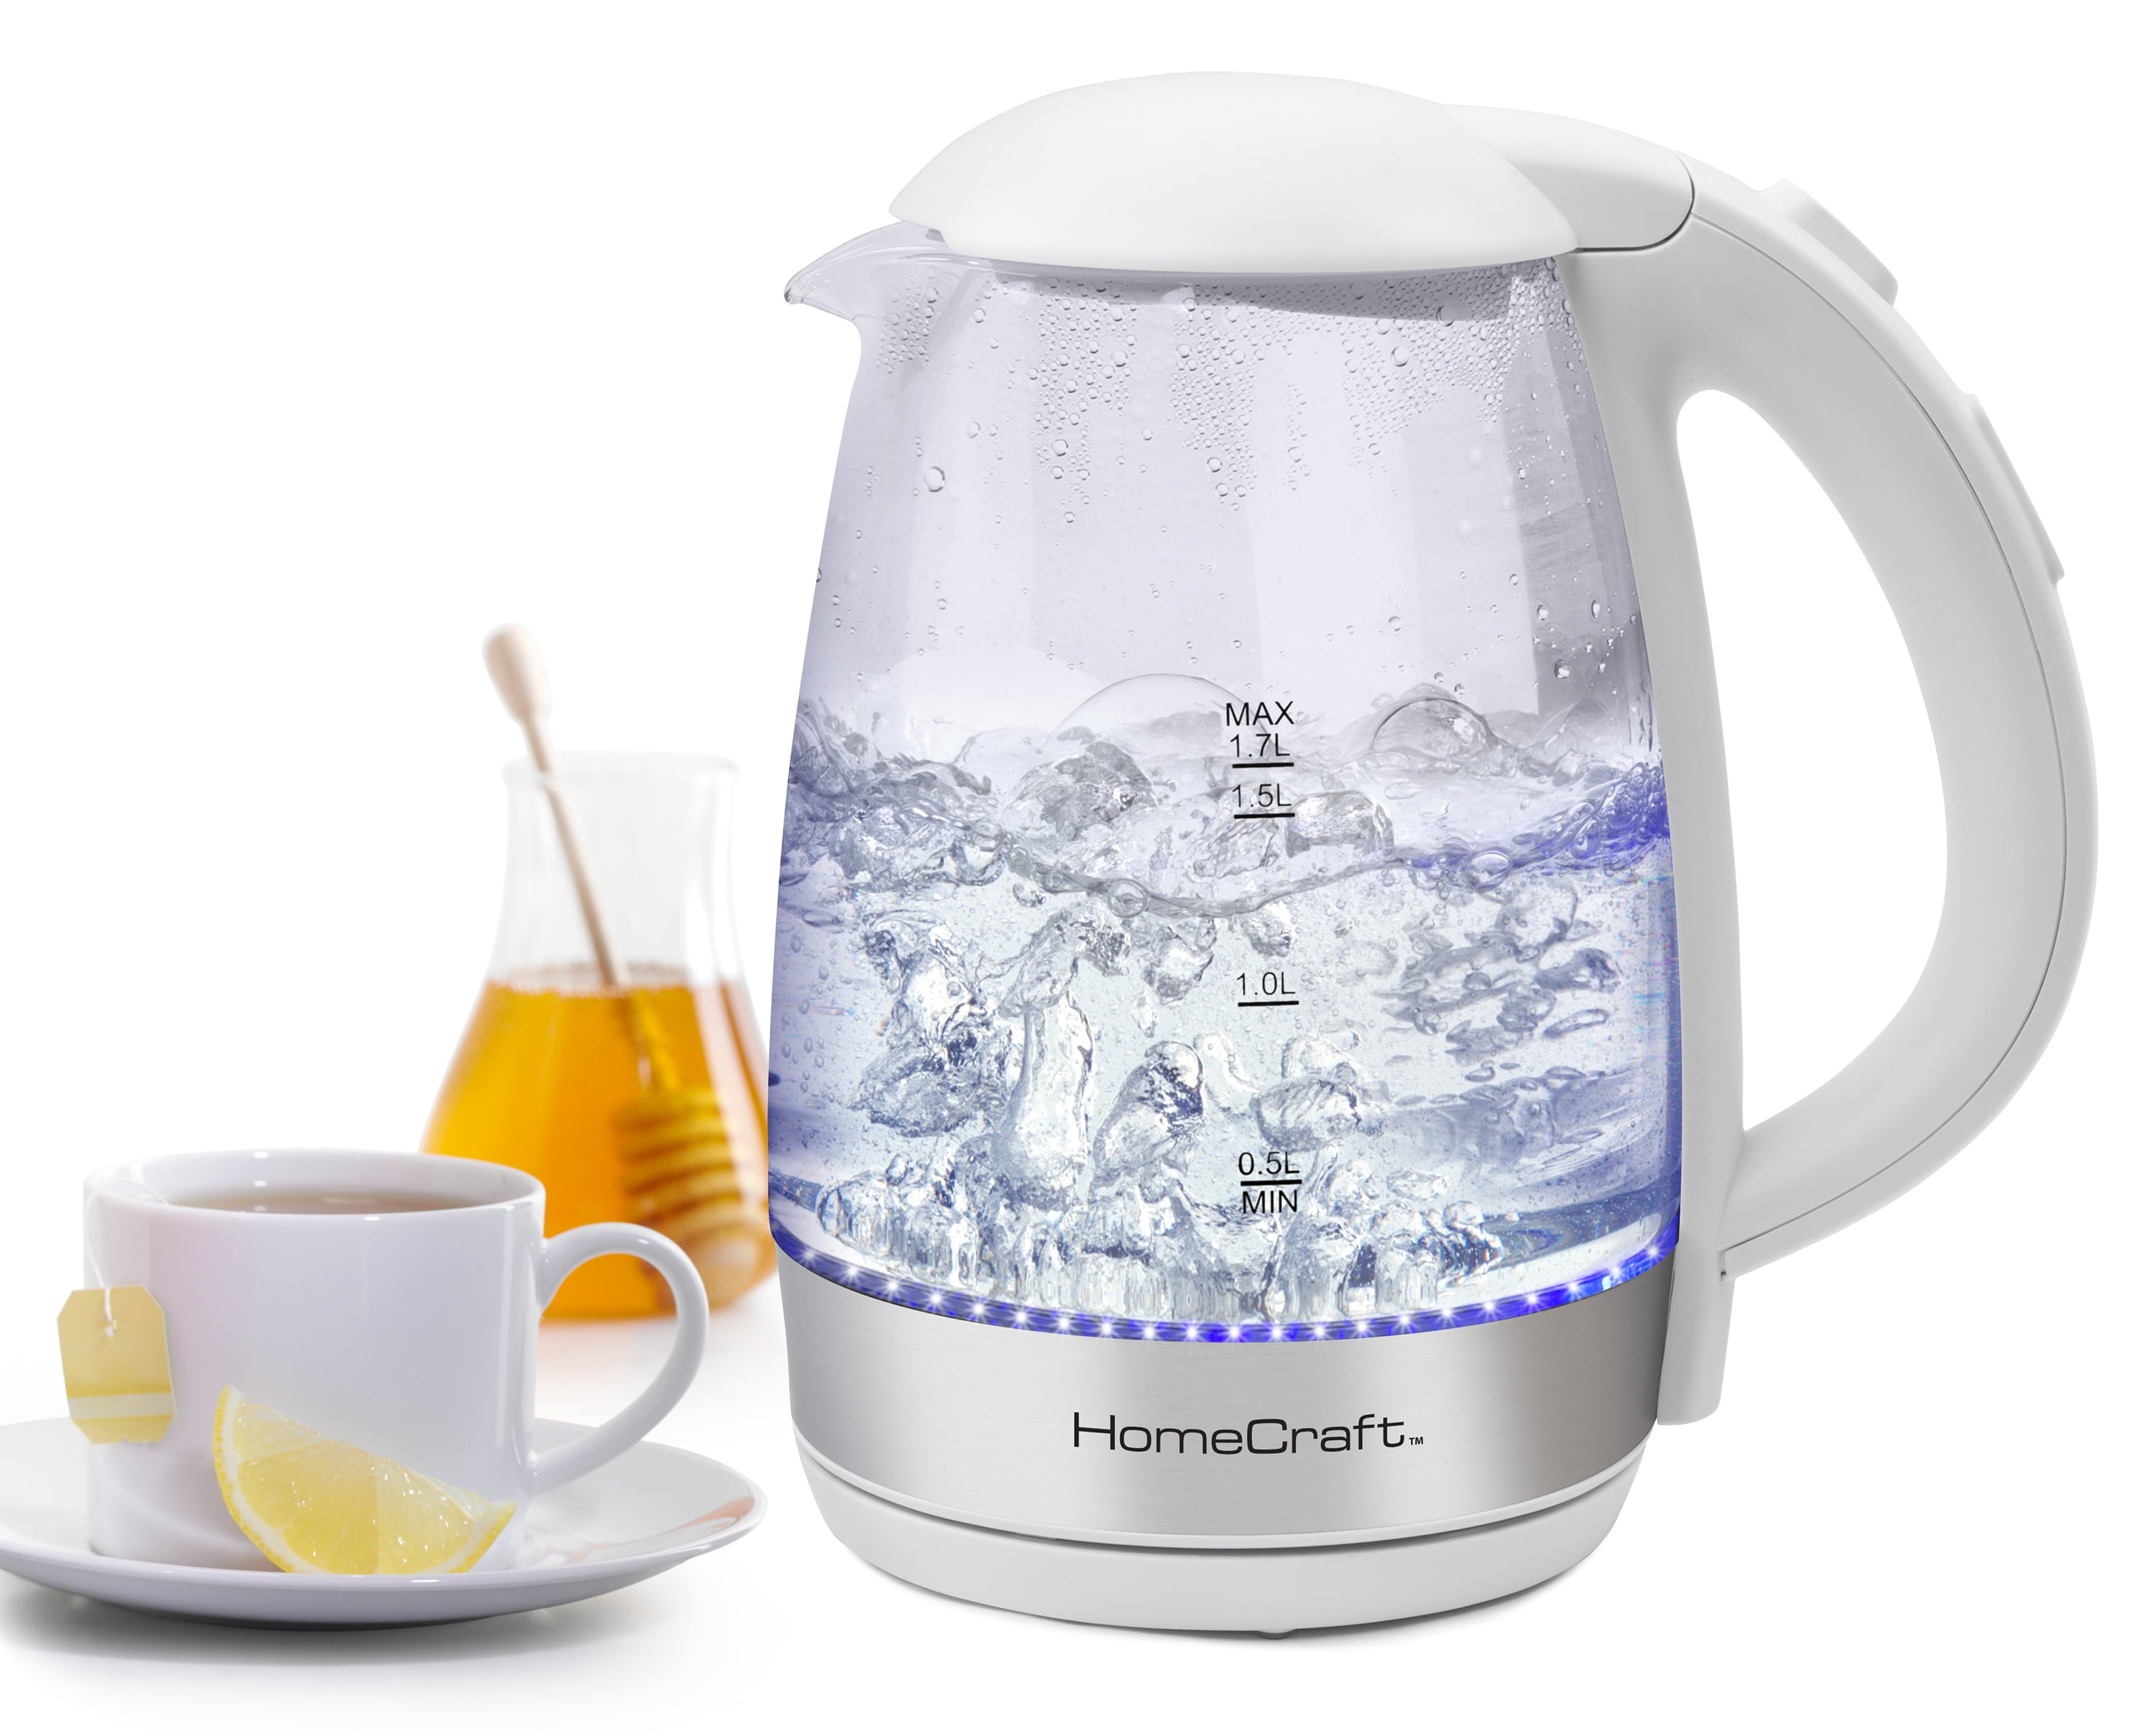 Brentwood Cordless Glass Electric Kettle with Tea Infuser and Swivel Base  1.79-Qt. White (KT-1962W) 